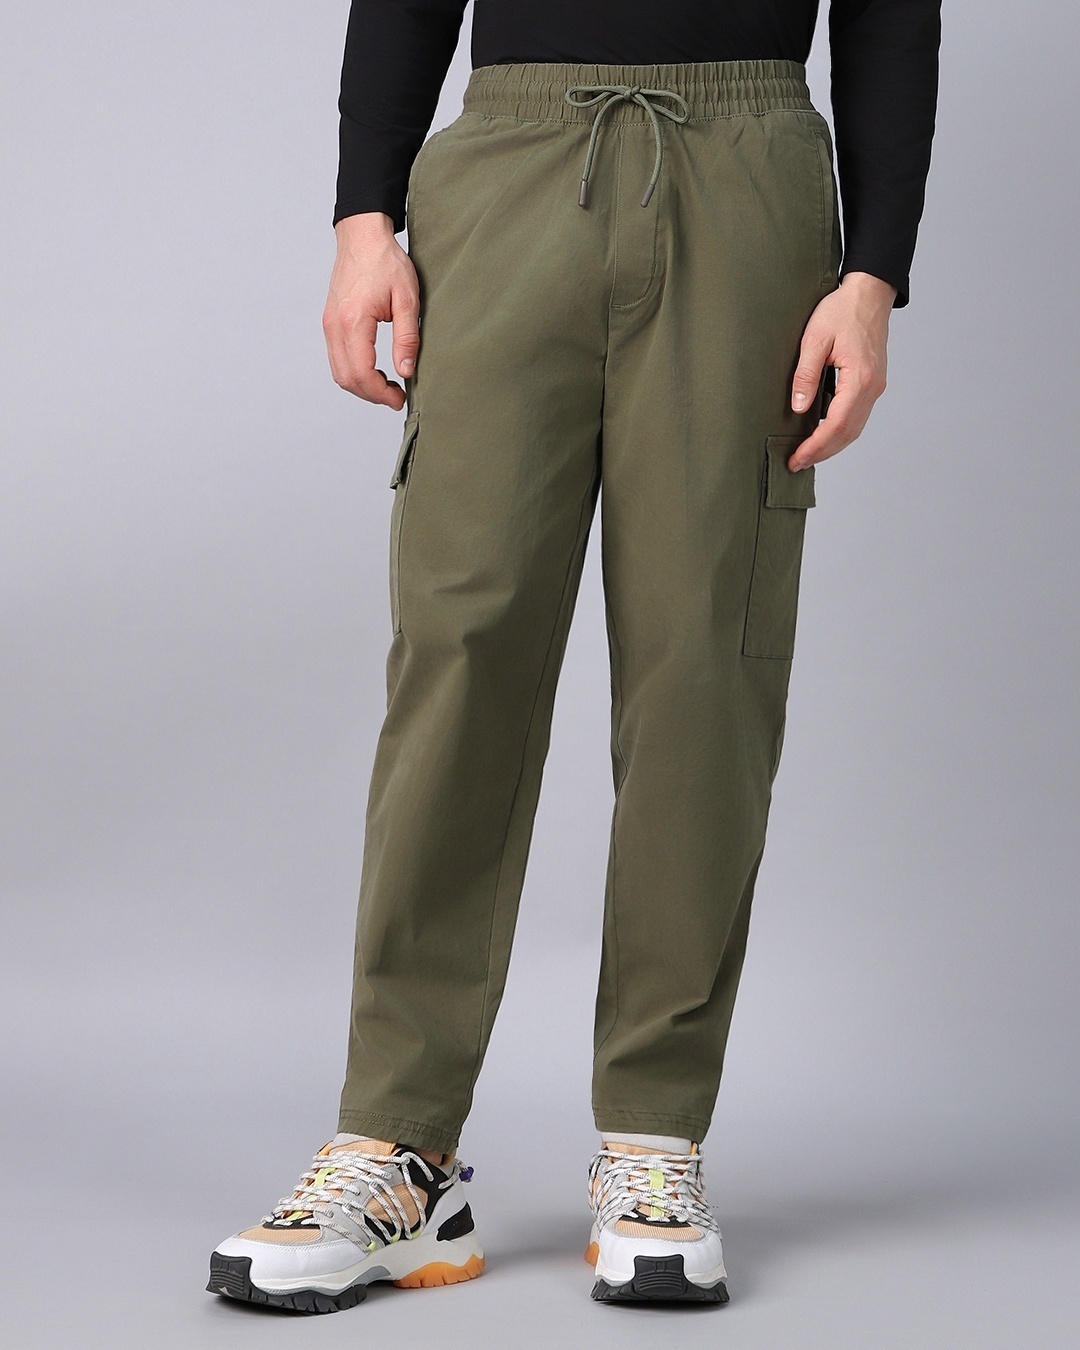 model wearing Different Types of Cargo Pants as Cargo Trouser